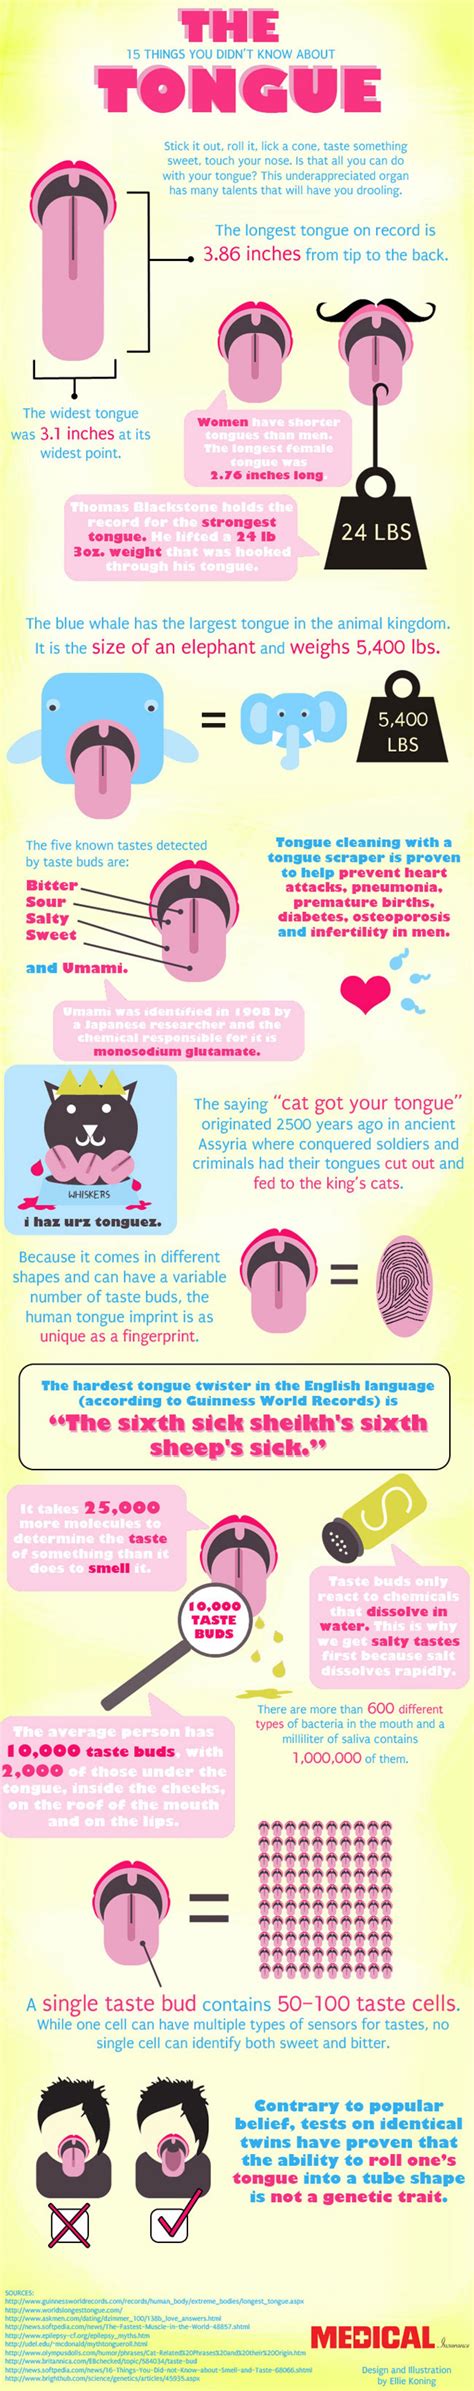 15 Things You Didnt Know About The Tongue